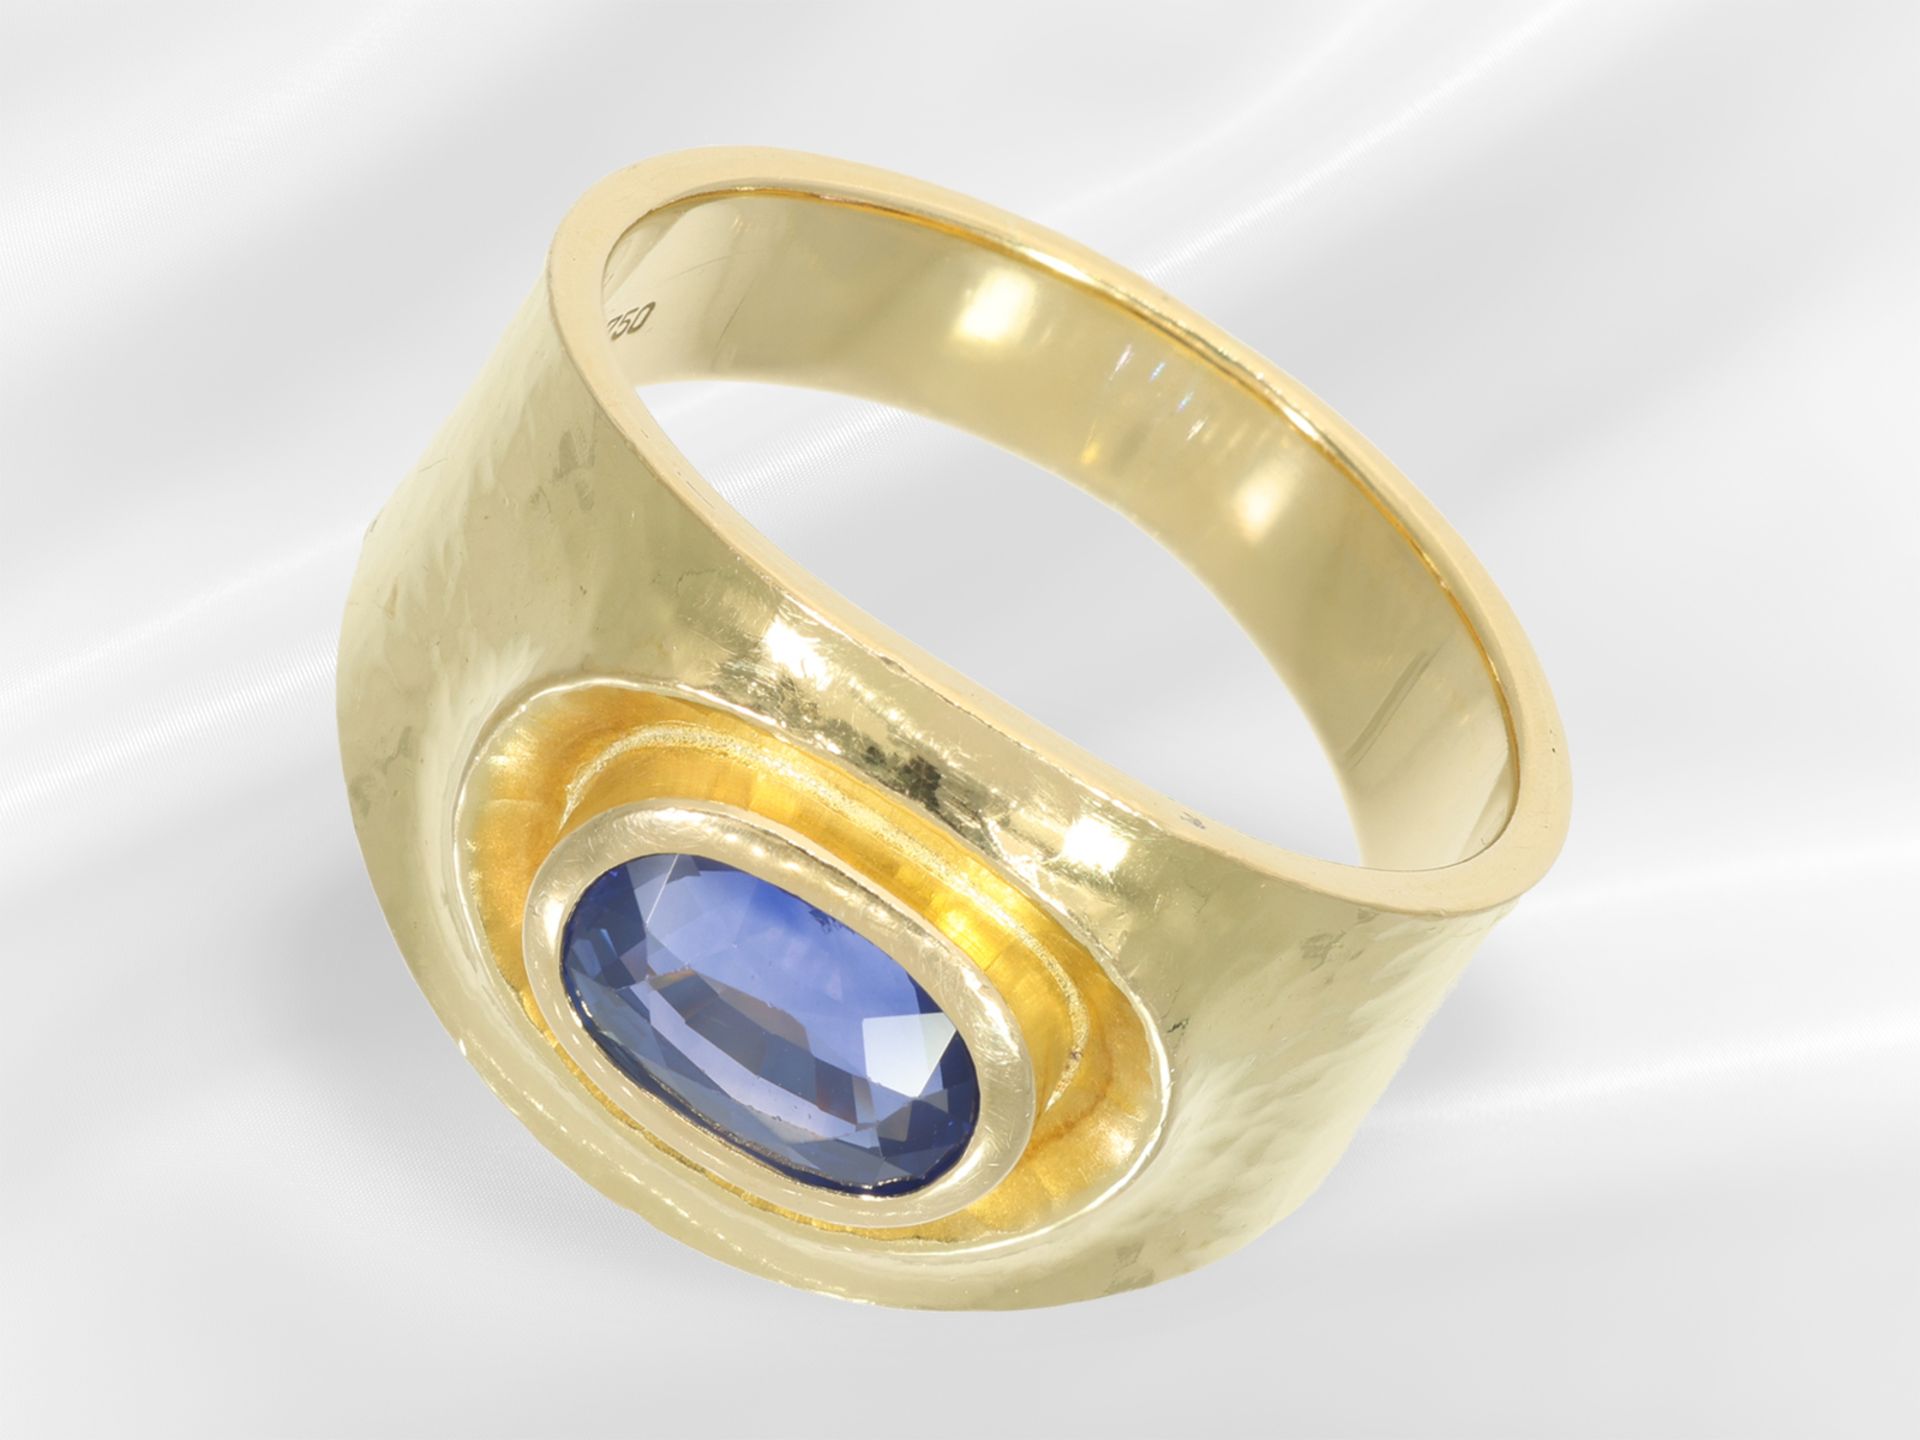 Ring: very beautiful high quality sapphire ring, approx. 2ct